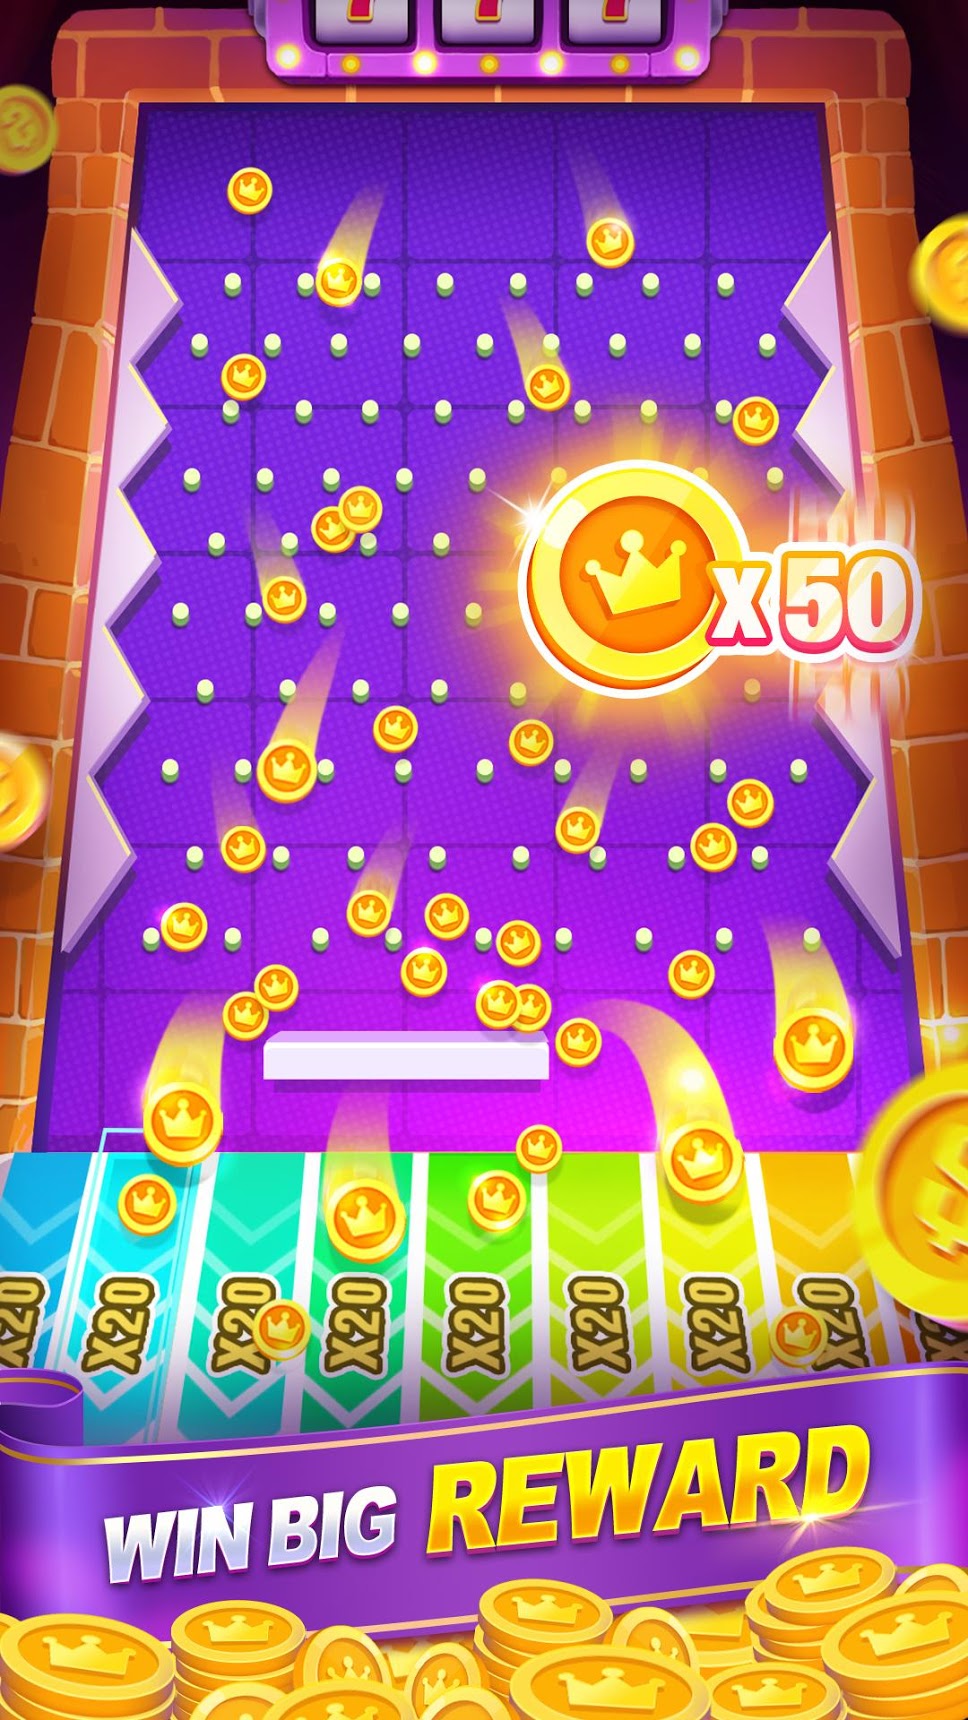 Coin Plinko APP - Video game Vibez. real or Fake, Payment proof?